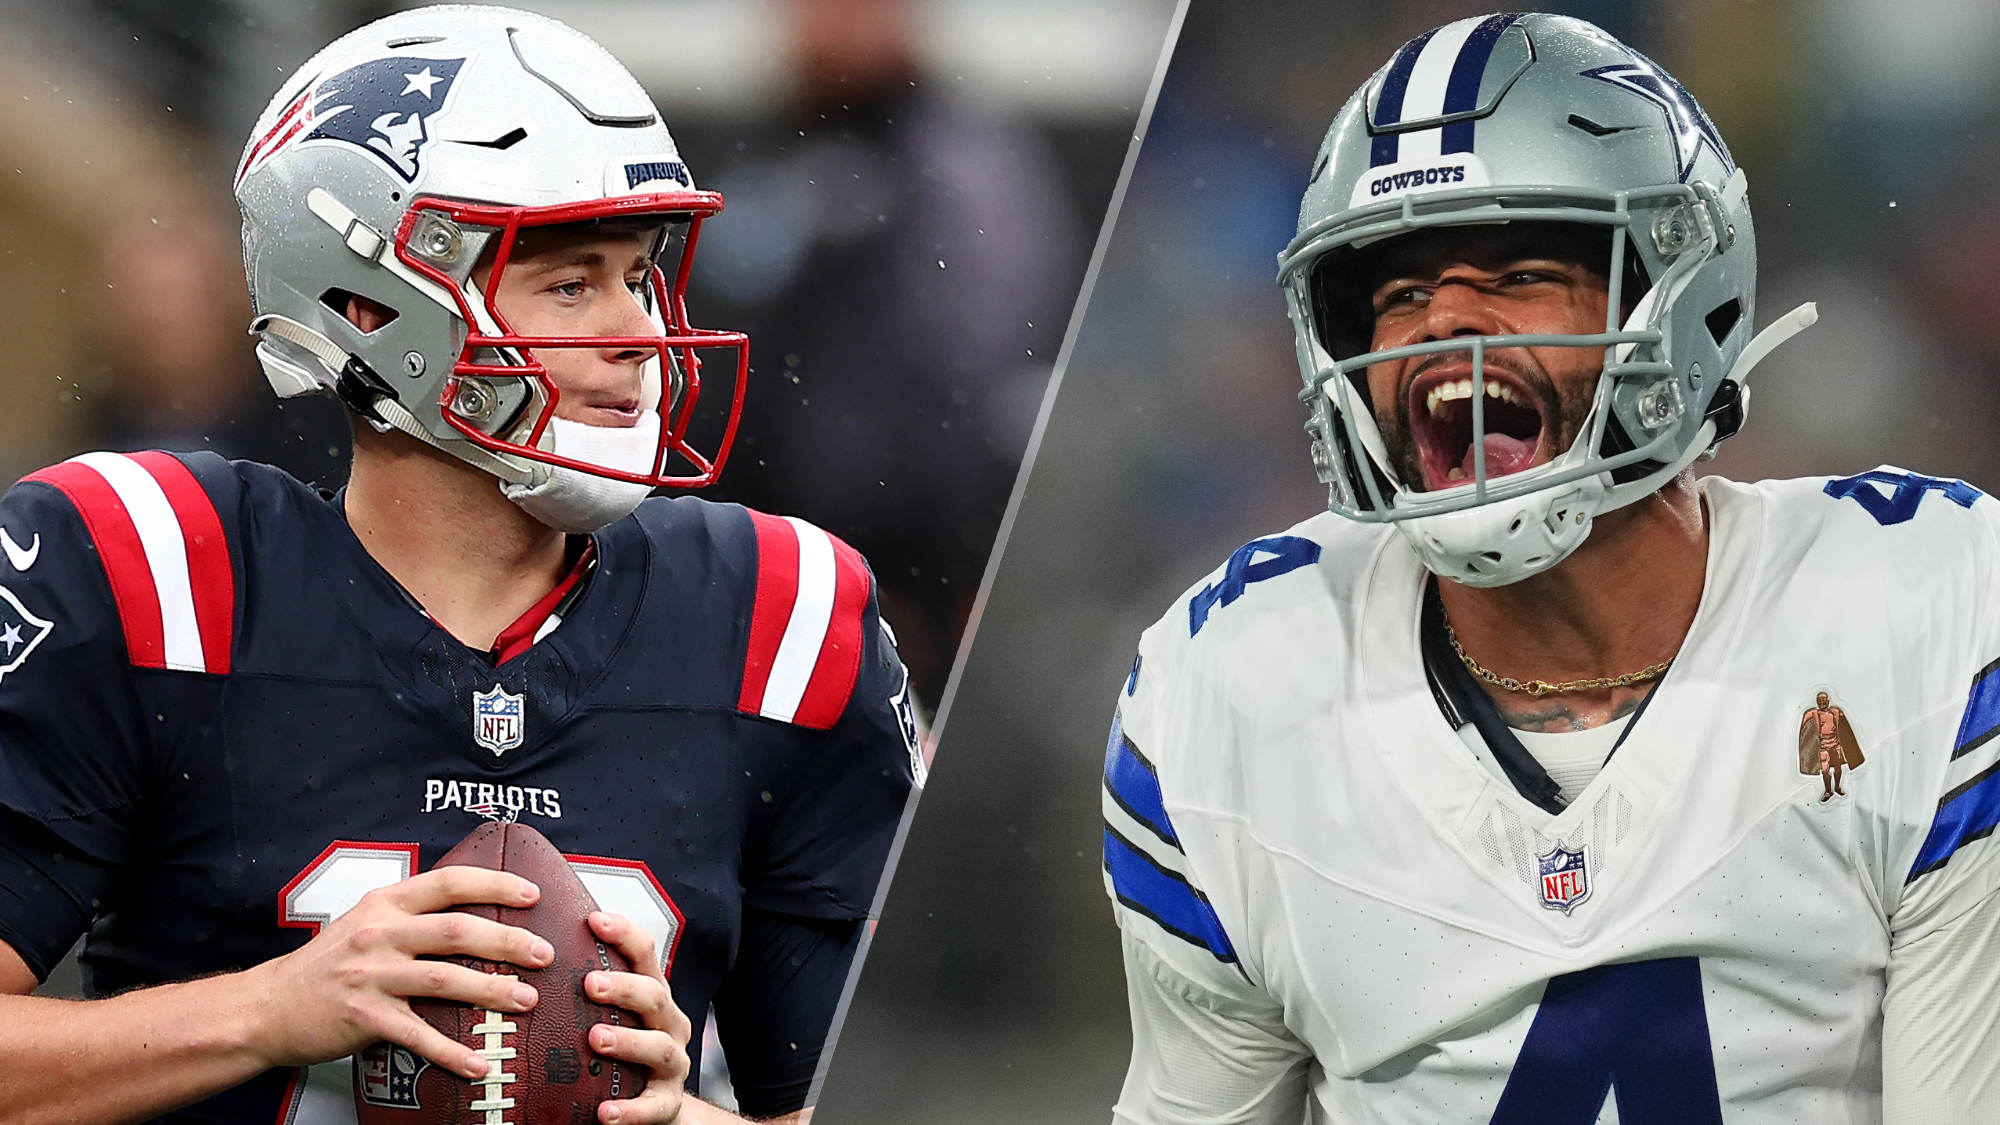 Patriots vs Cowboys live stream: How to watch NFL week 4 online